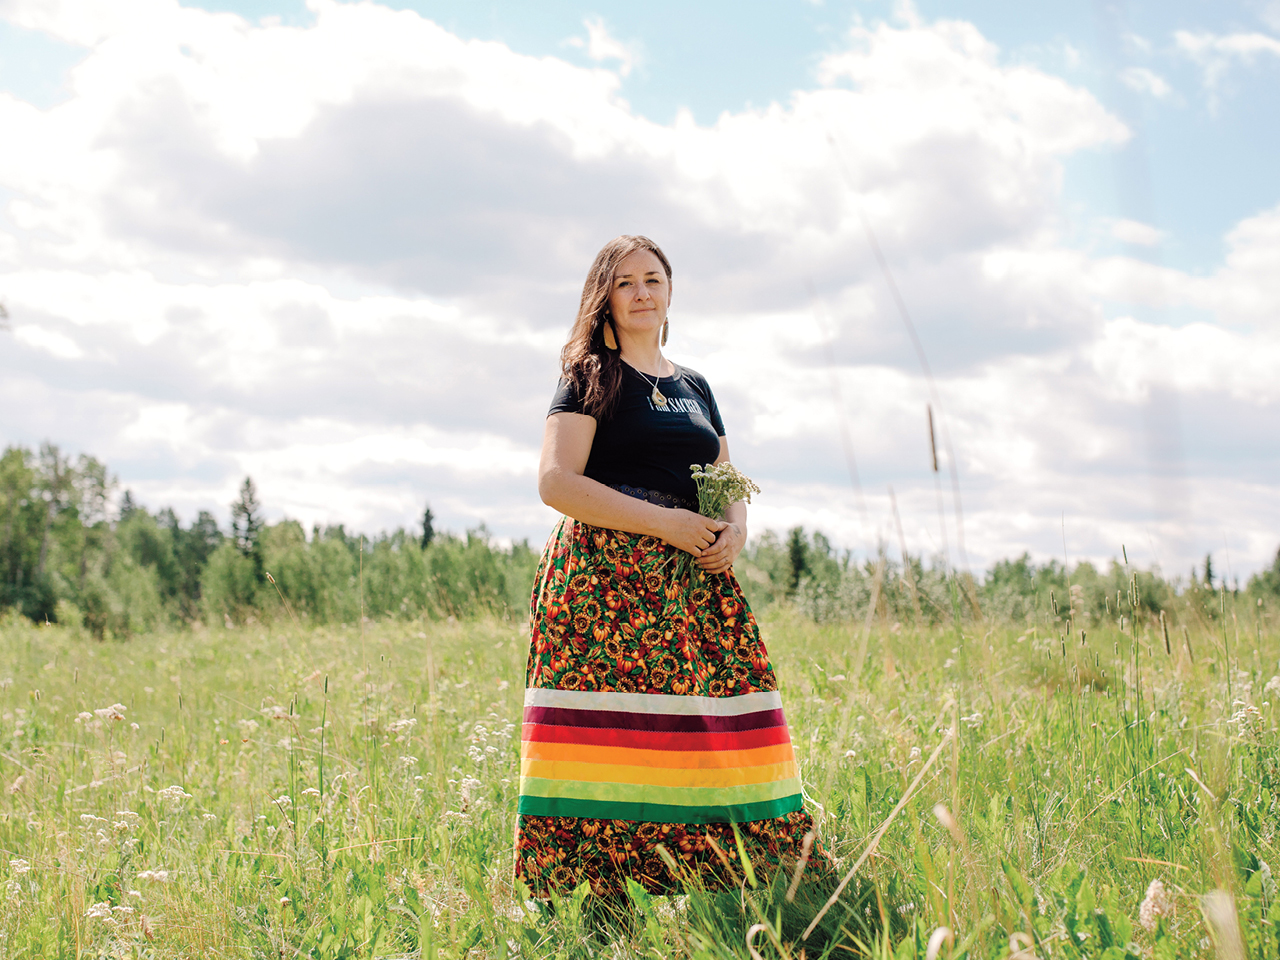 Tiffany Traverse stands in a field, she is holding a small bouquet of flowers